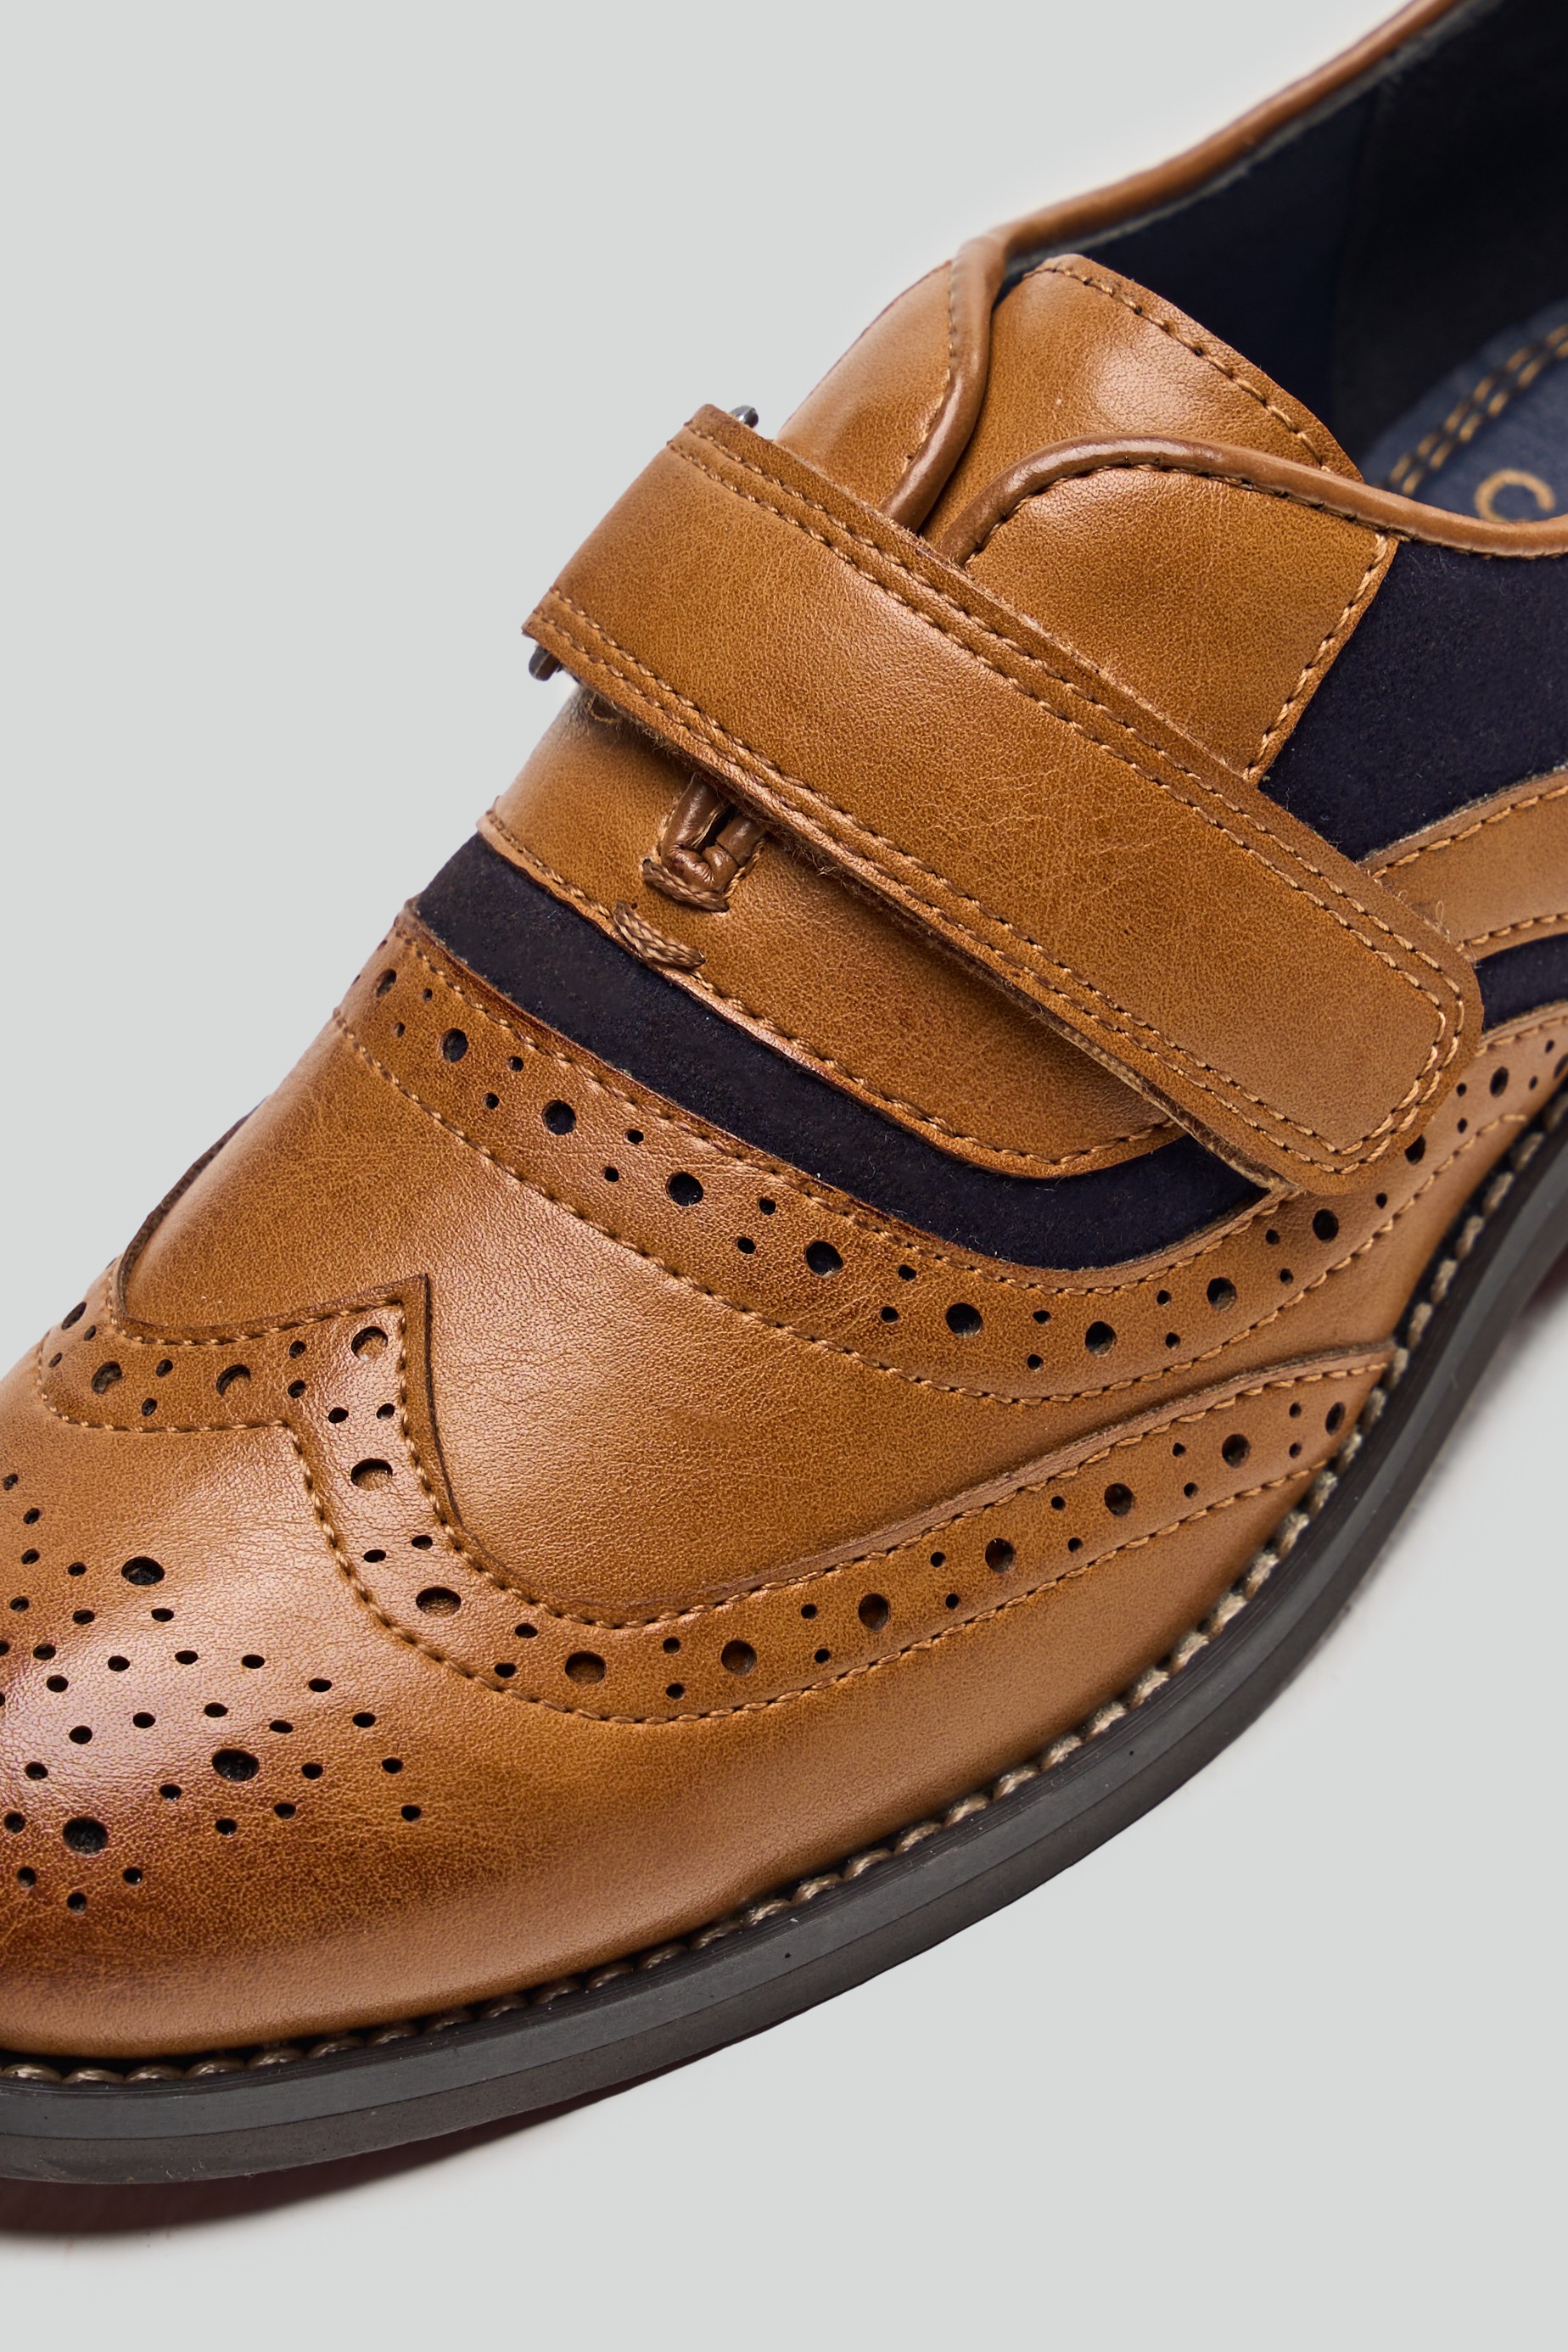 Boys Lace-up Oxford Brogue Dress shoes - RUSSEL - Tan Brown - Navy Blue